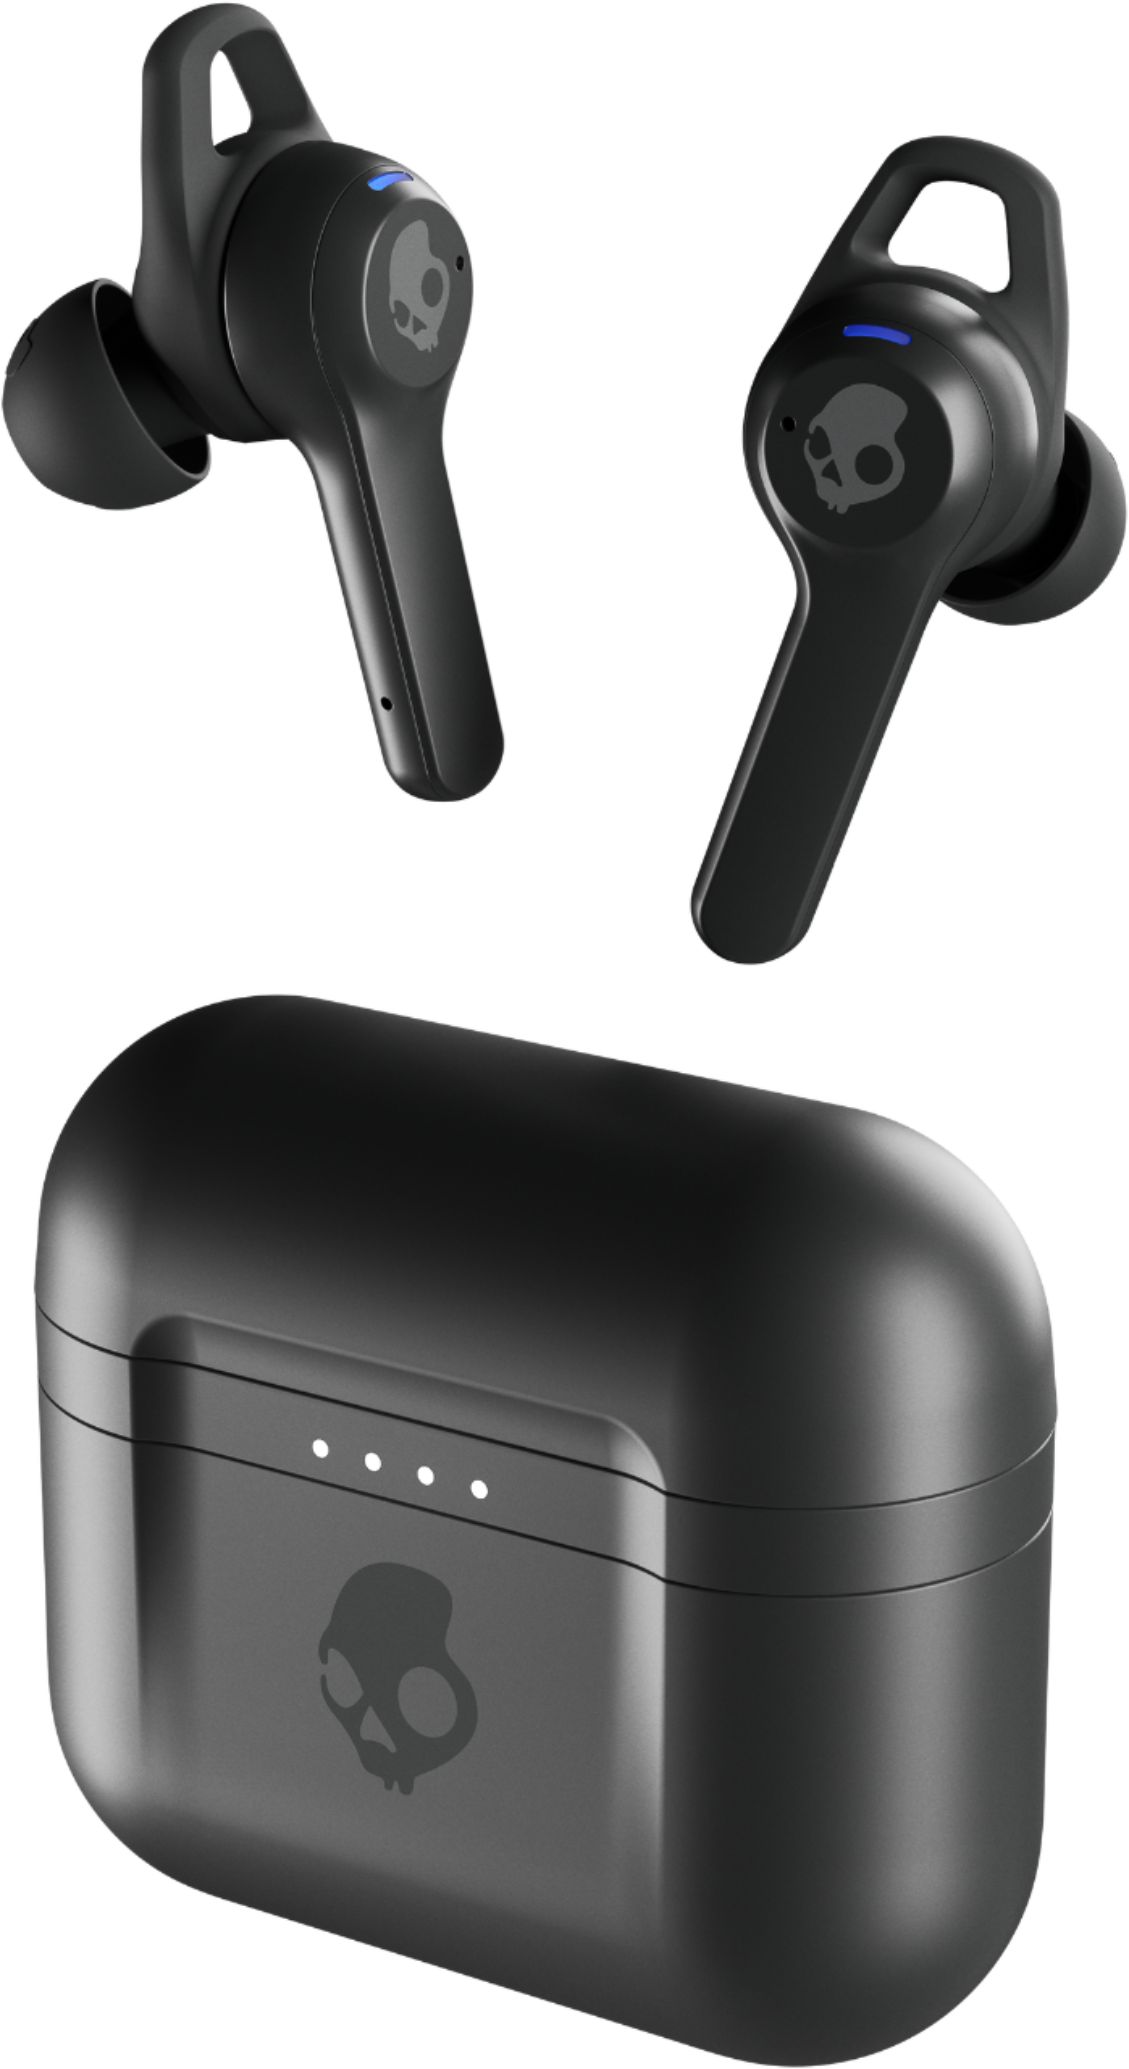 Skullcandy Totally Wireless Essential - Jib True XT2 Earbuds with Tile